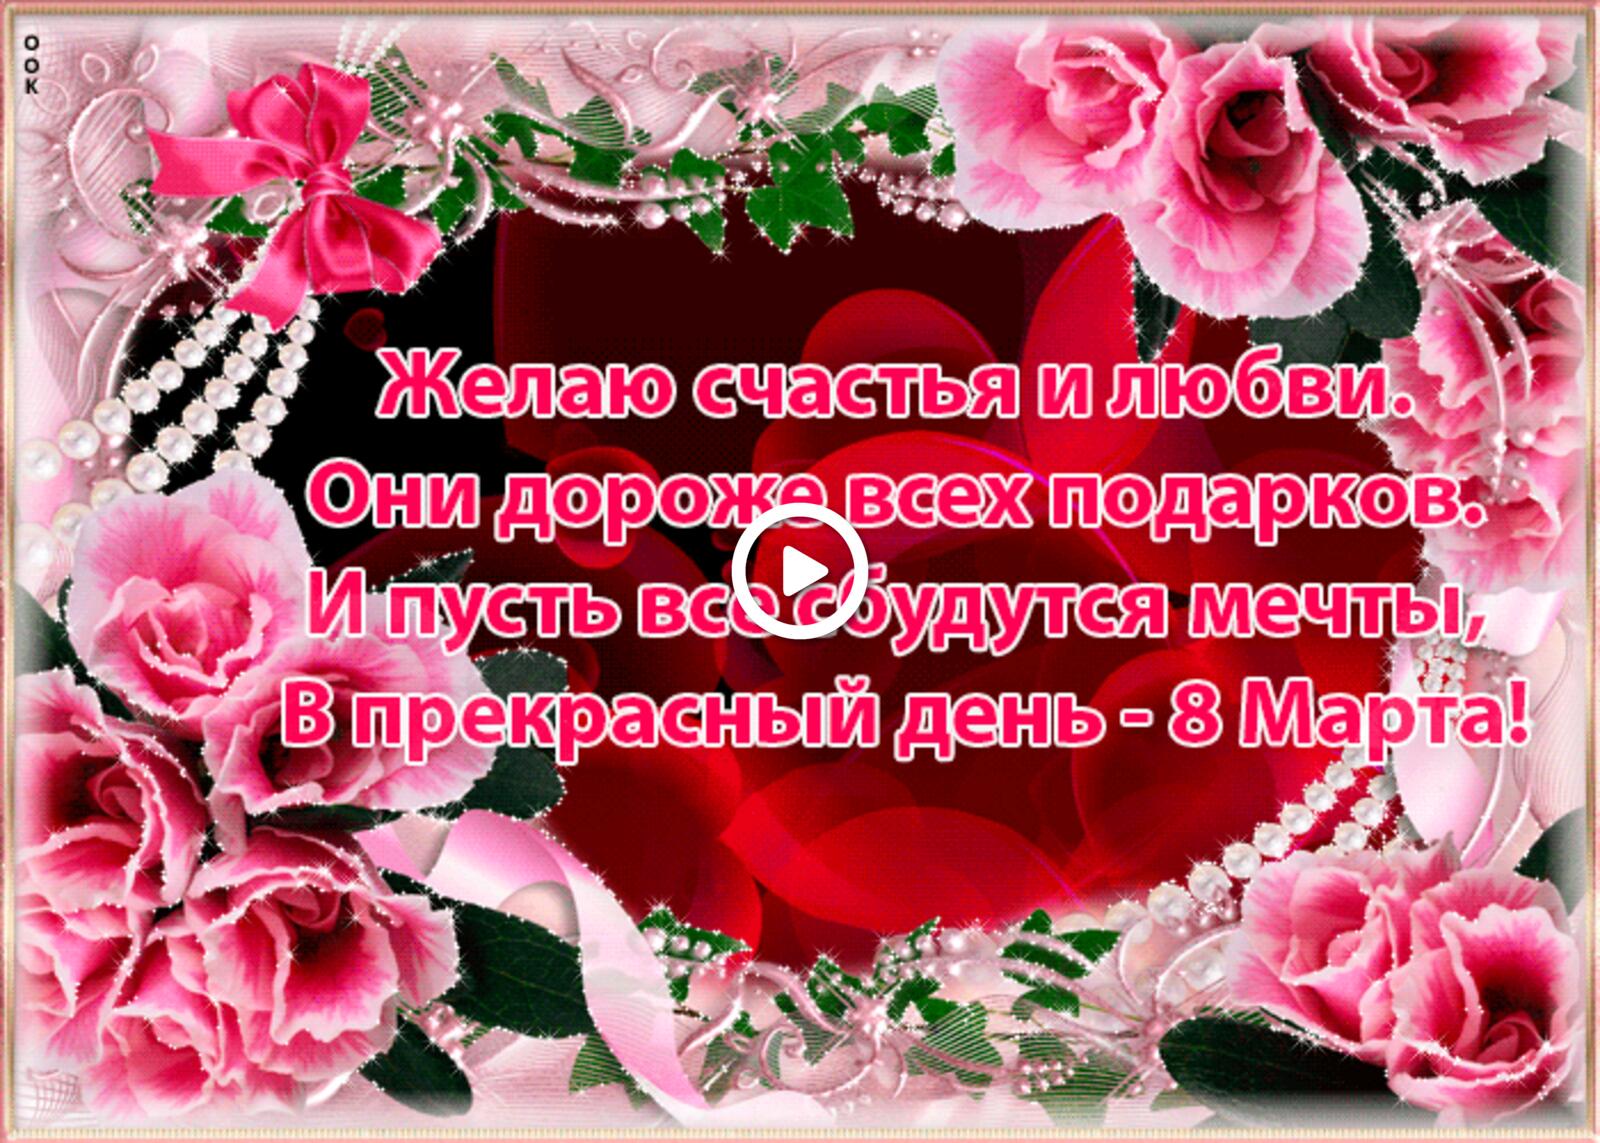 A postcard on the subject of happy march 8 poems holidays women`s day for free